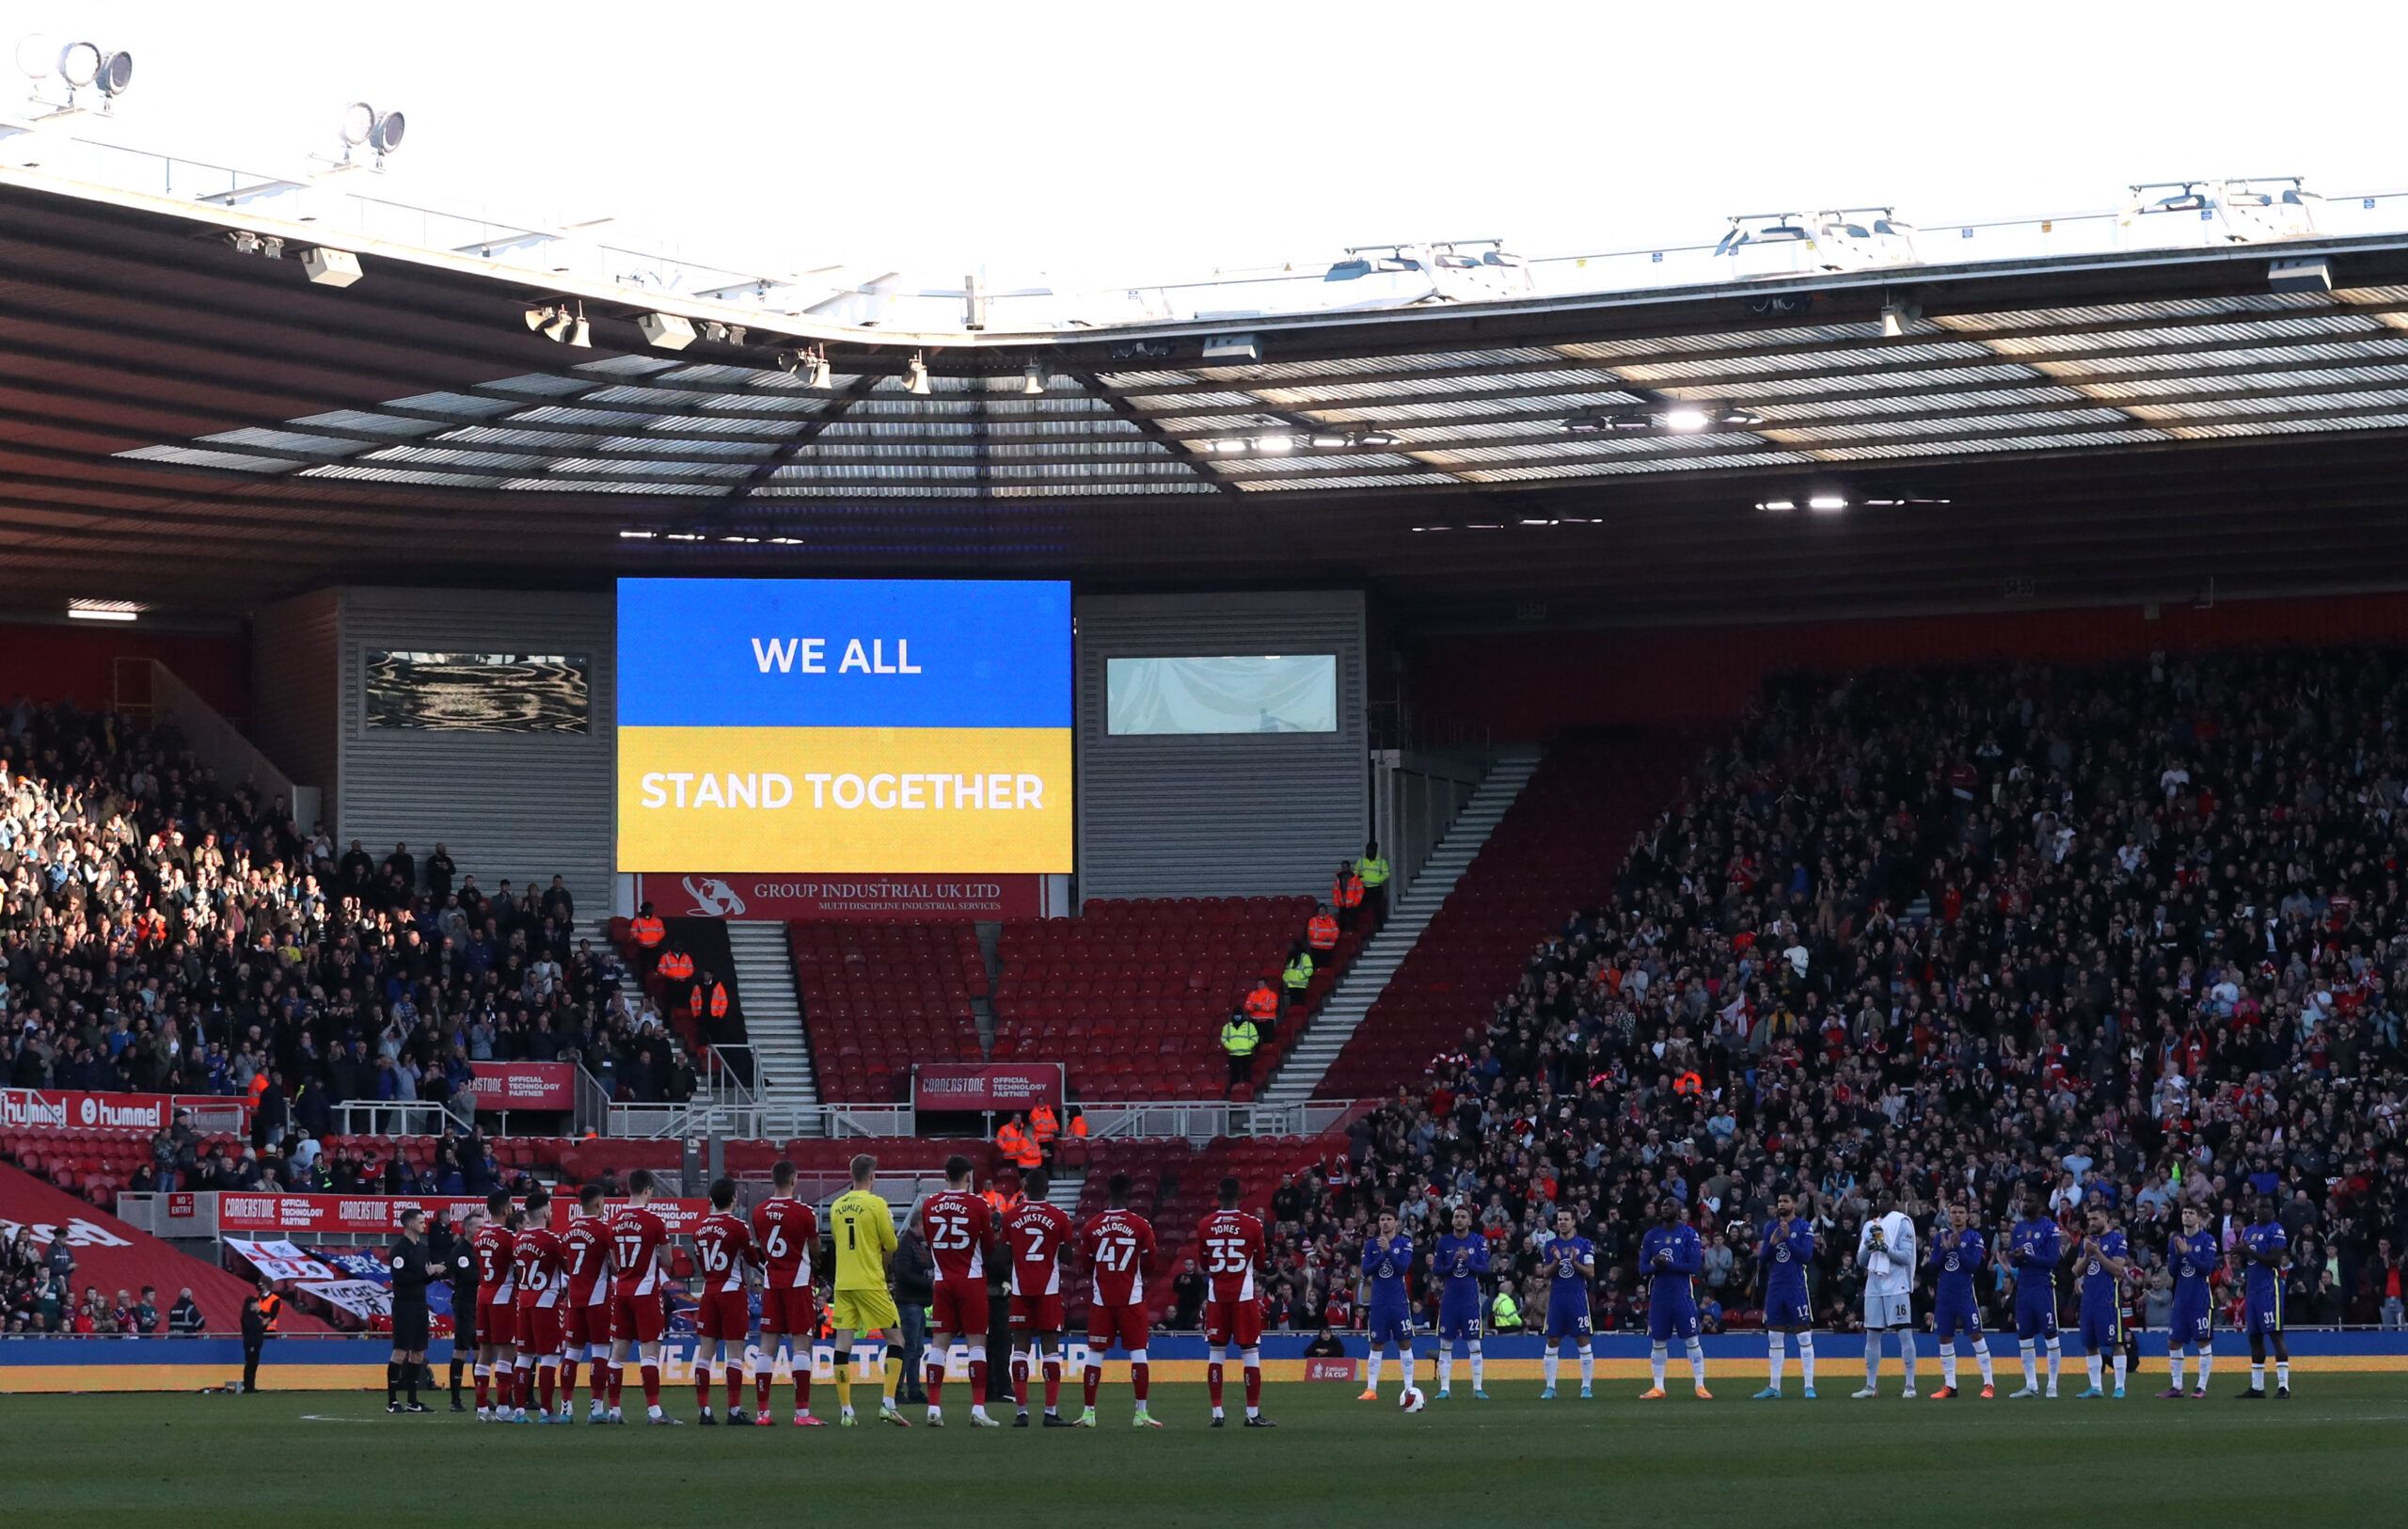 Soccer Football - FA Cup Quarter Final - Middlesbrough v Chelsea - Riverside Stadium, Middlesbrough, Britain - March 19, 2022 General view during a minutes applause in support of Ukraine amid Russia's invasion before the match REUTERS/Scott Heppell